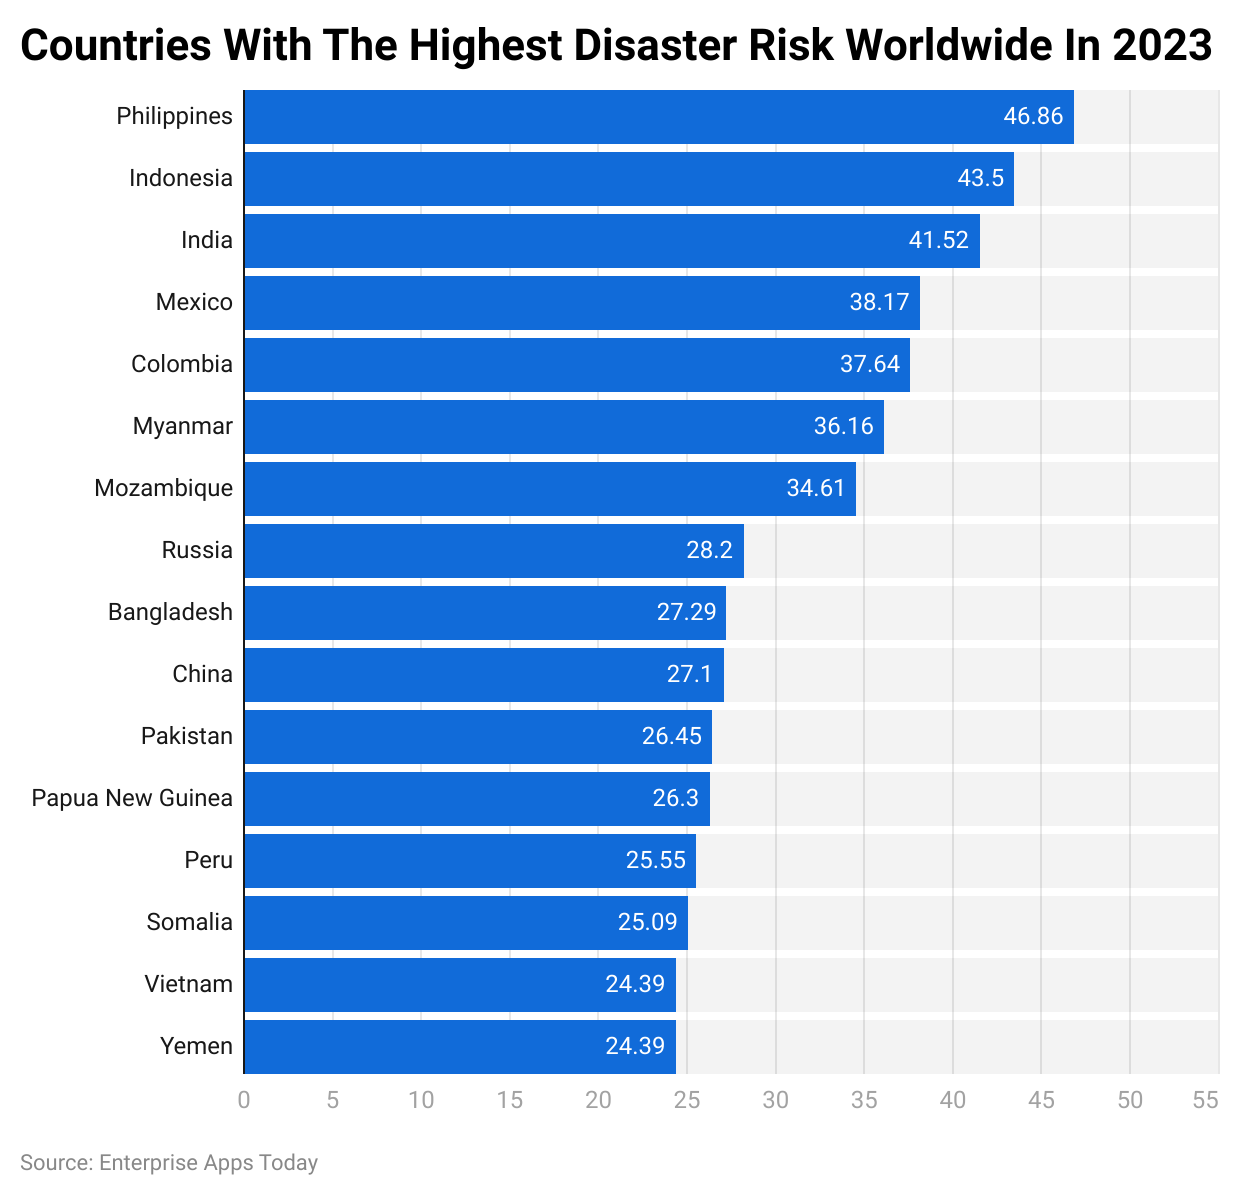 Countries with the highest disaster risk worldwide in 2023